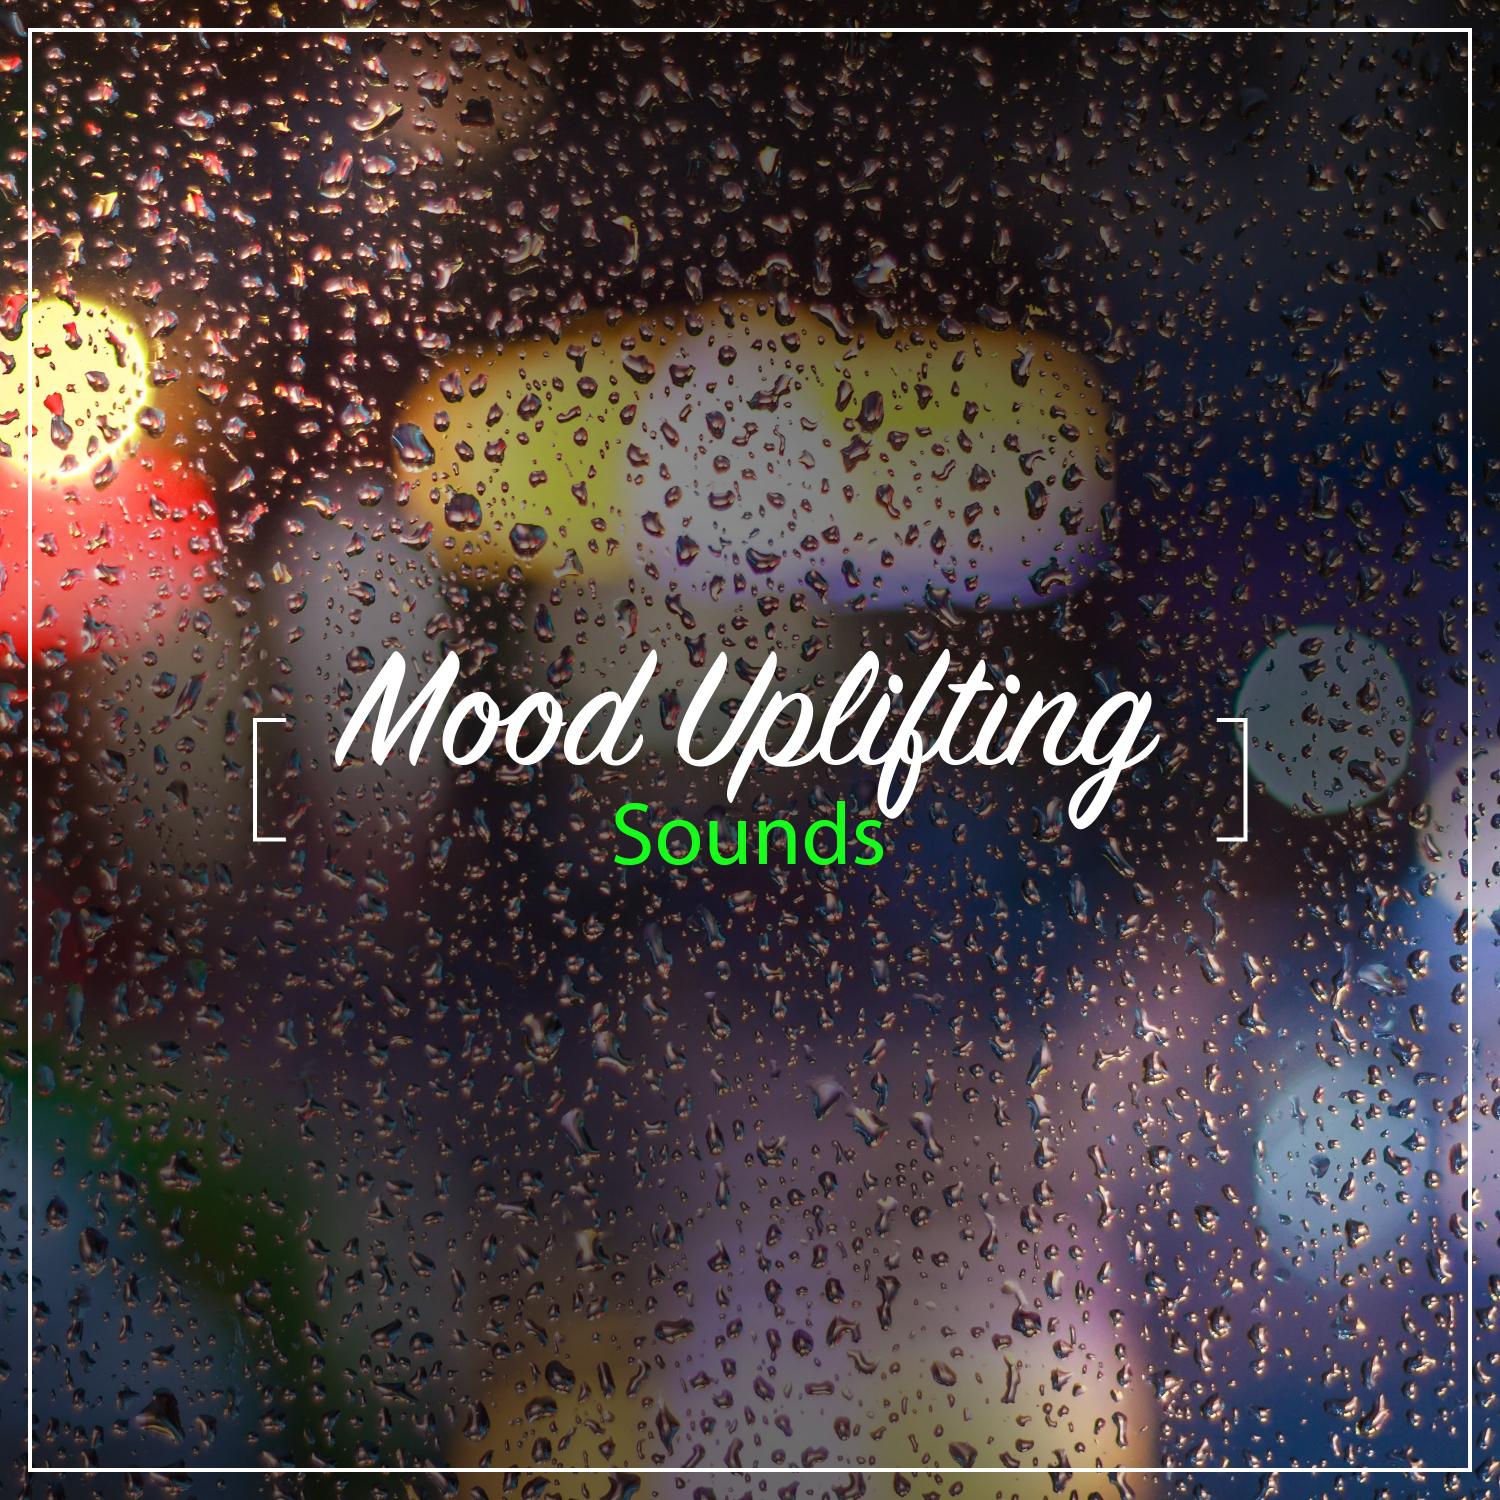 15 Mood Uplifting Sounds for Guided Meditation